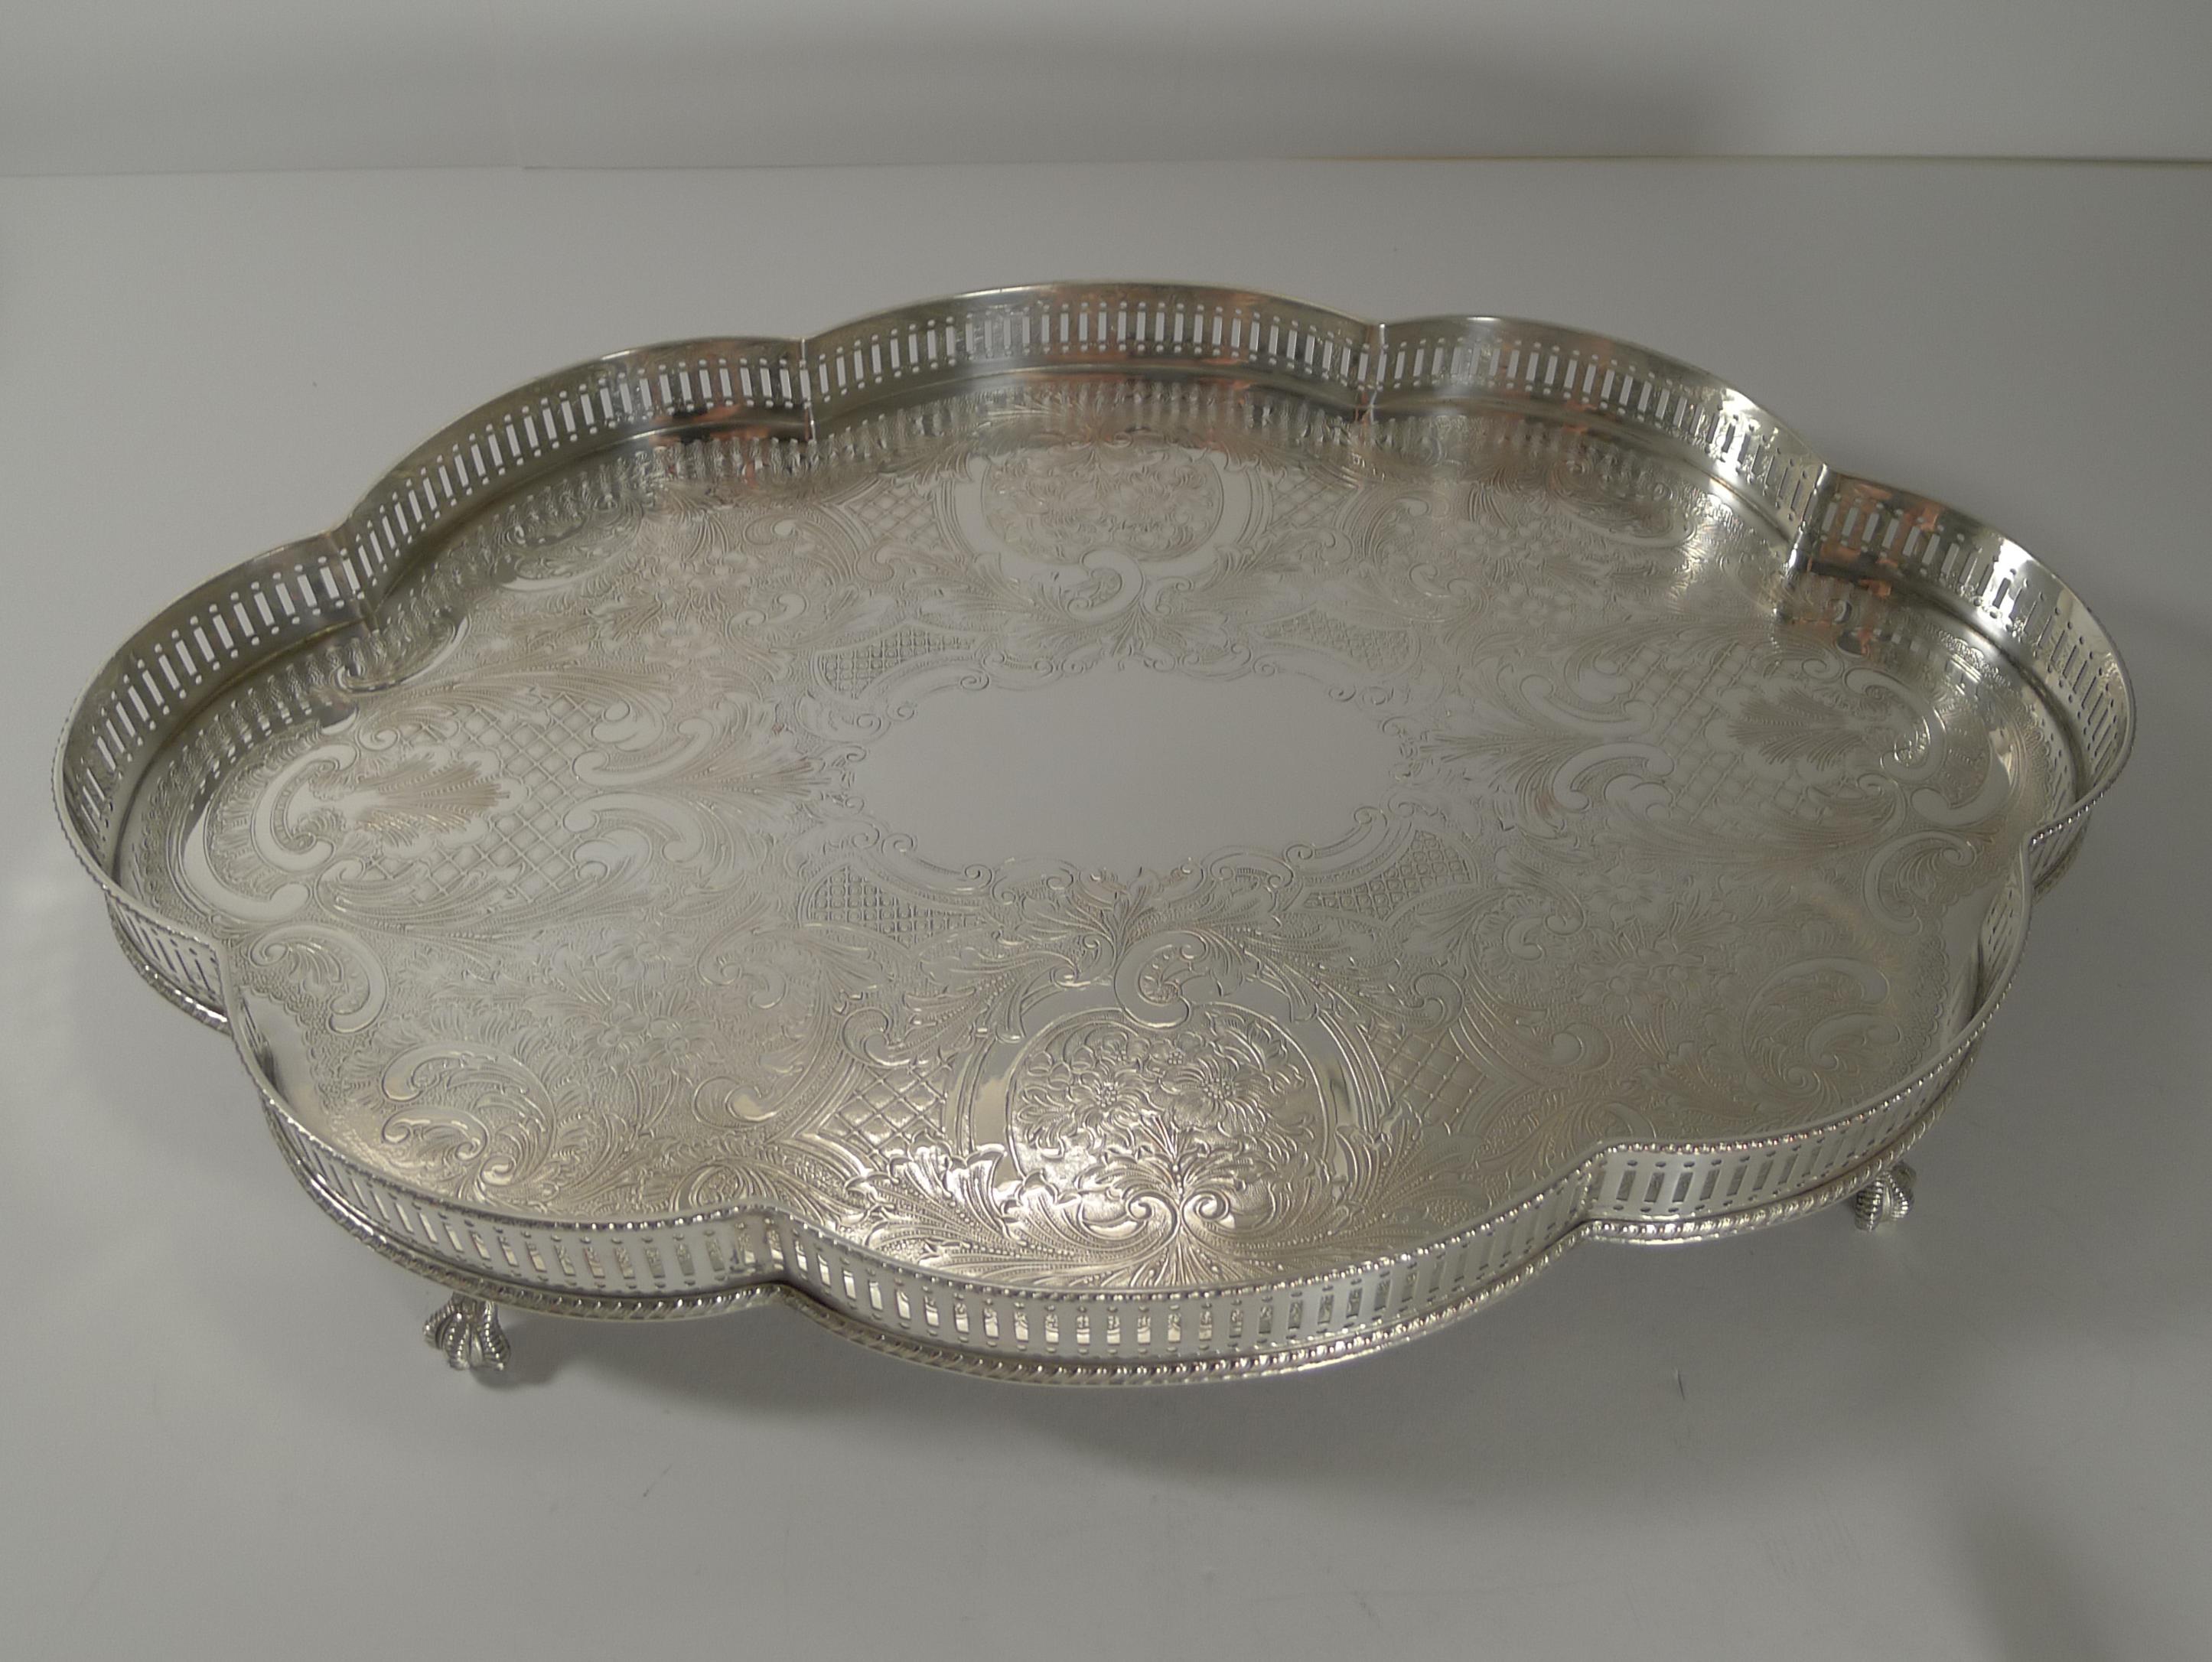 A beautifully shaped silver plated tray dating to c.1950 with all over engraved decoration surrounding a central vacant cartouche.

The galleried tray stands on four beautiful ball and claw feet.

Just back from our silversmith's workshop where